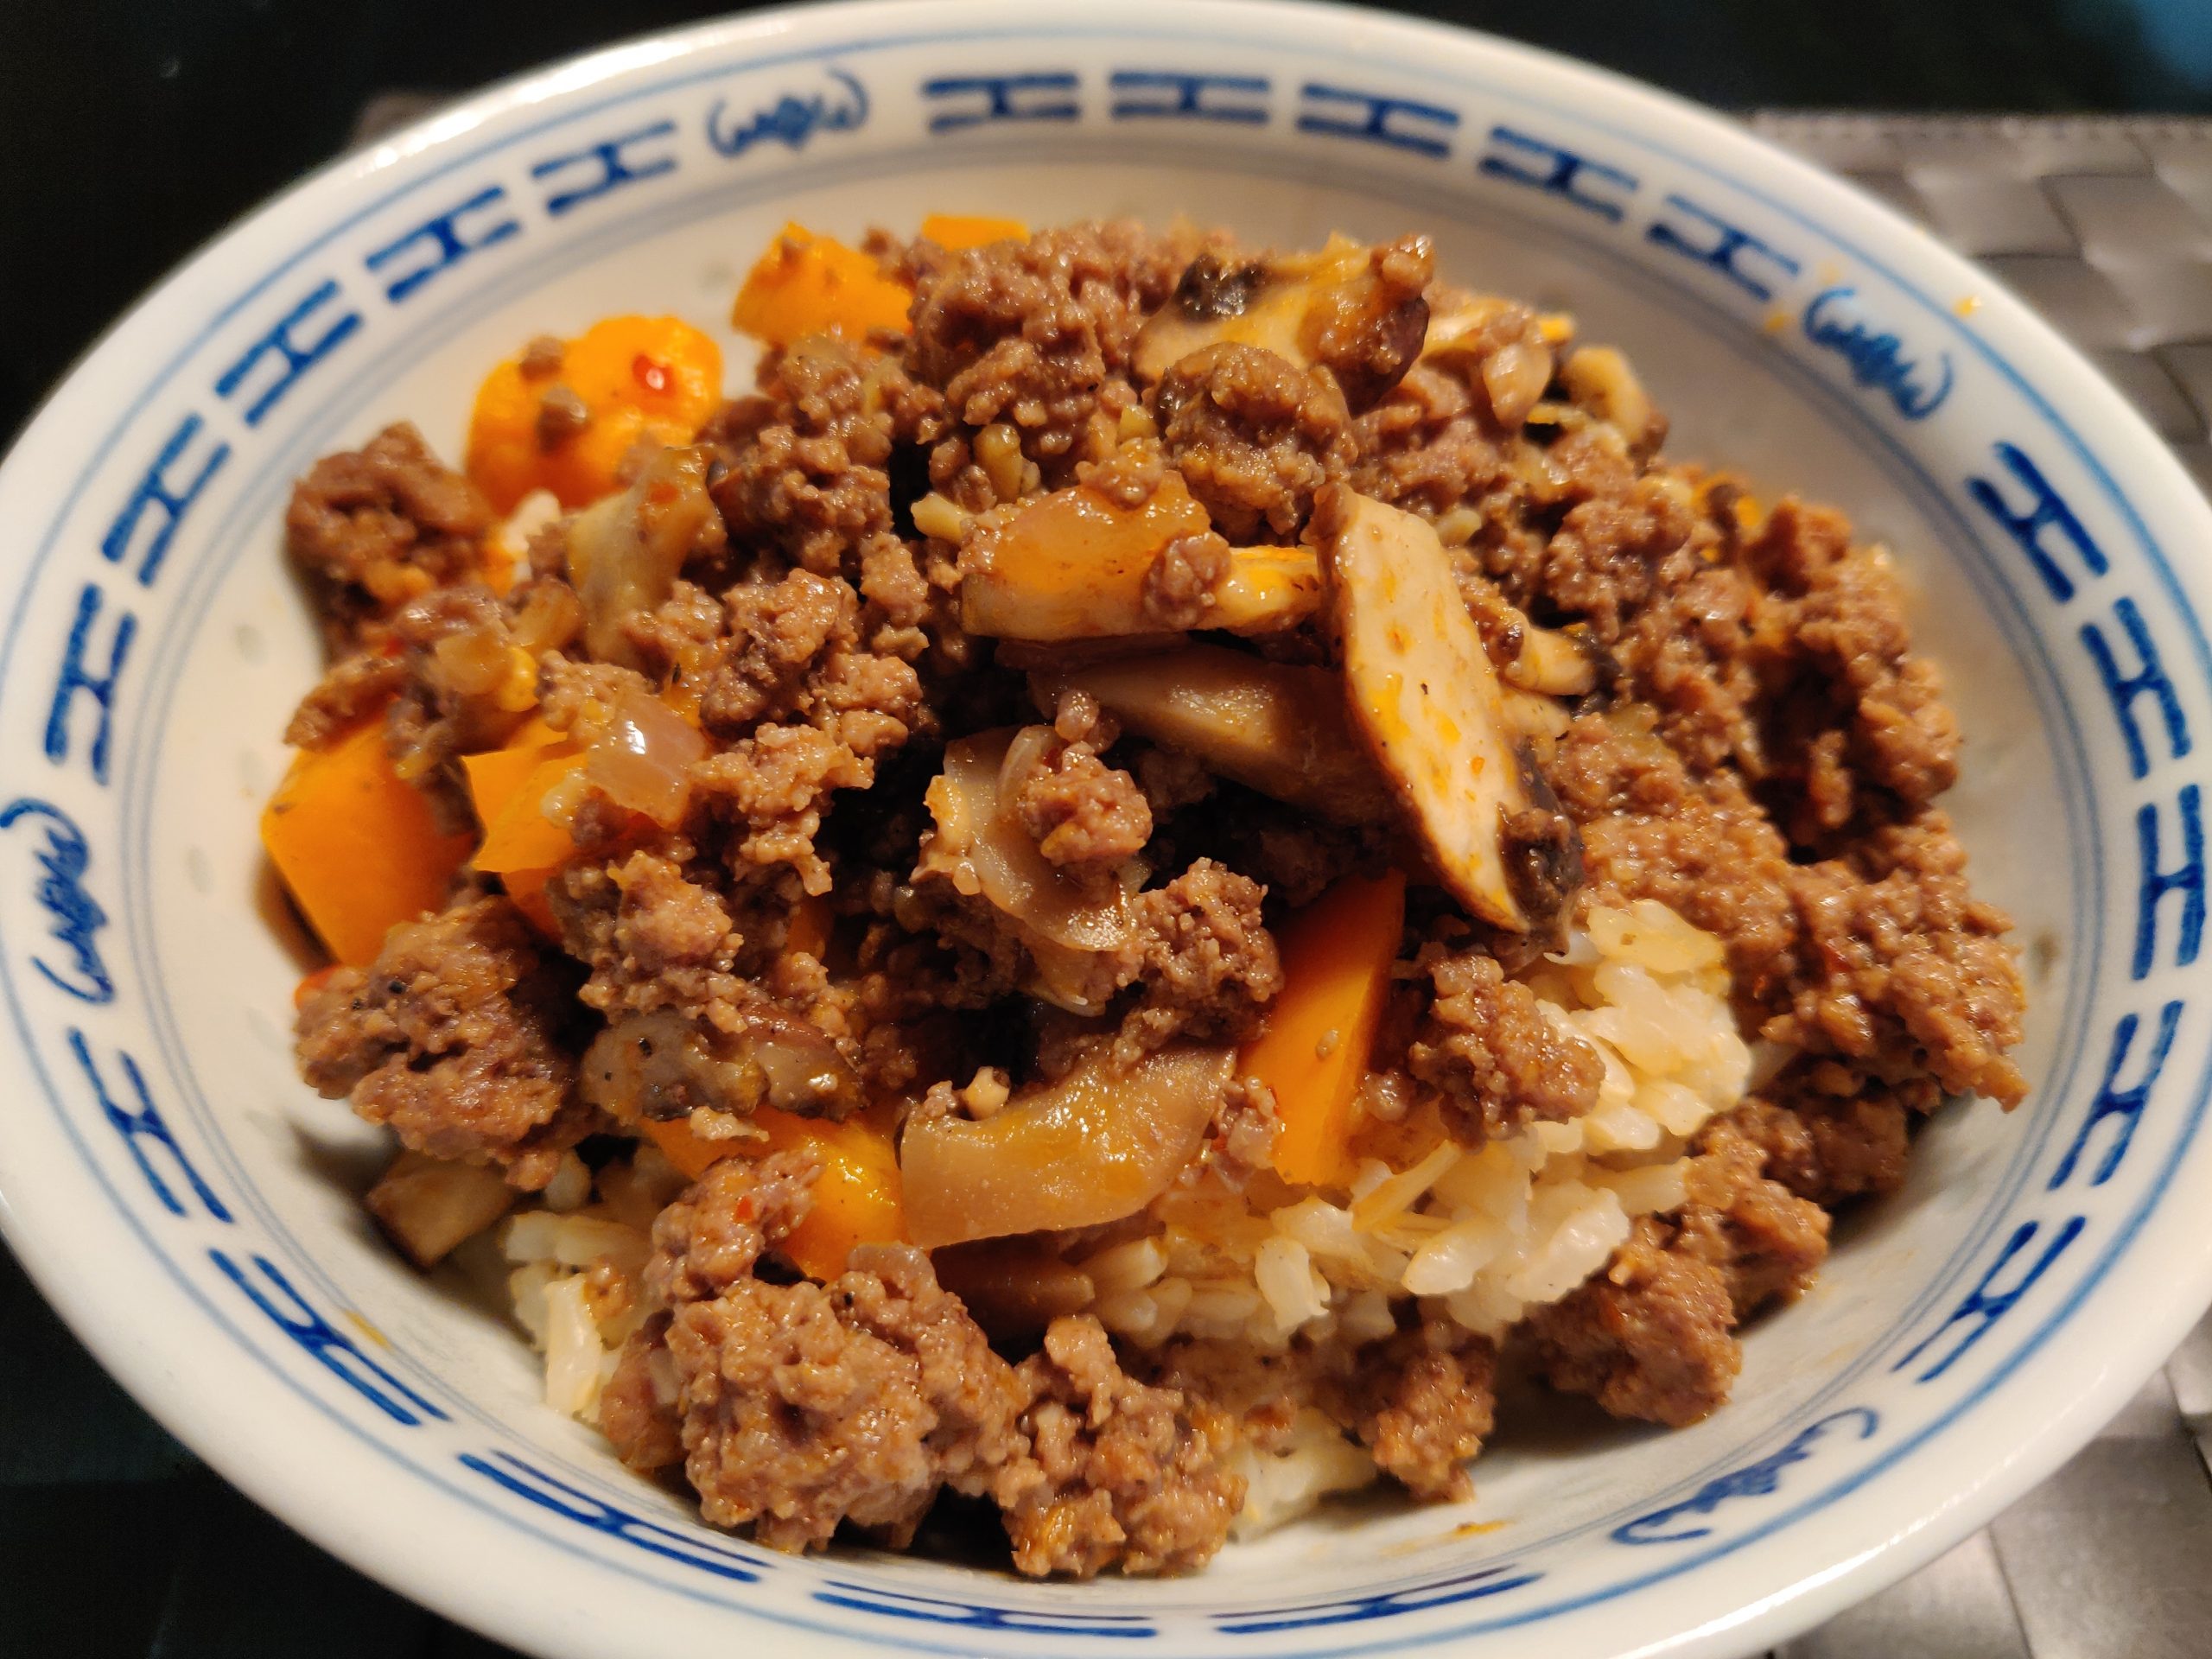 Ground beef and vegetables